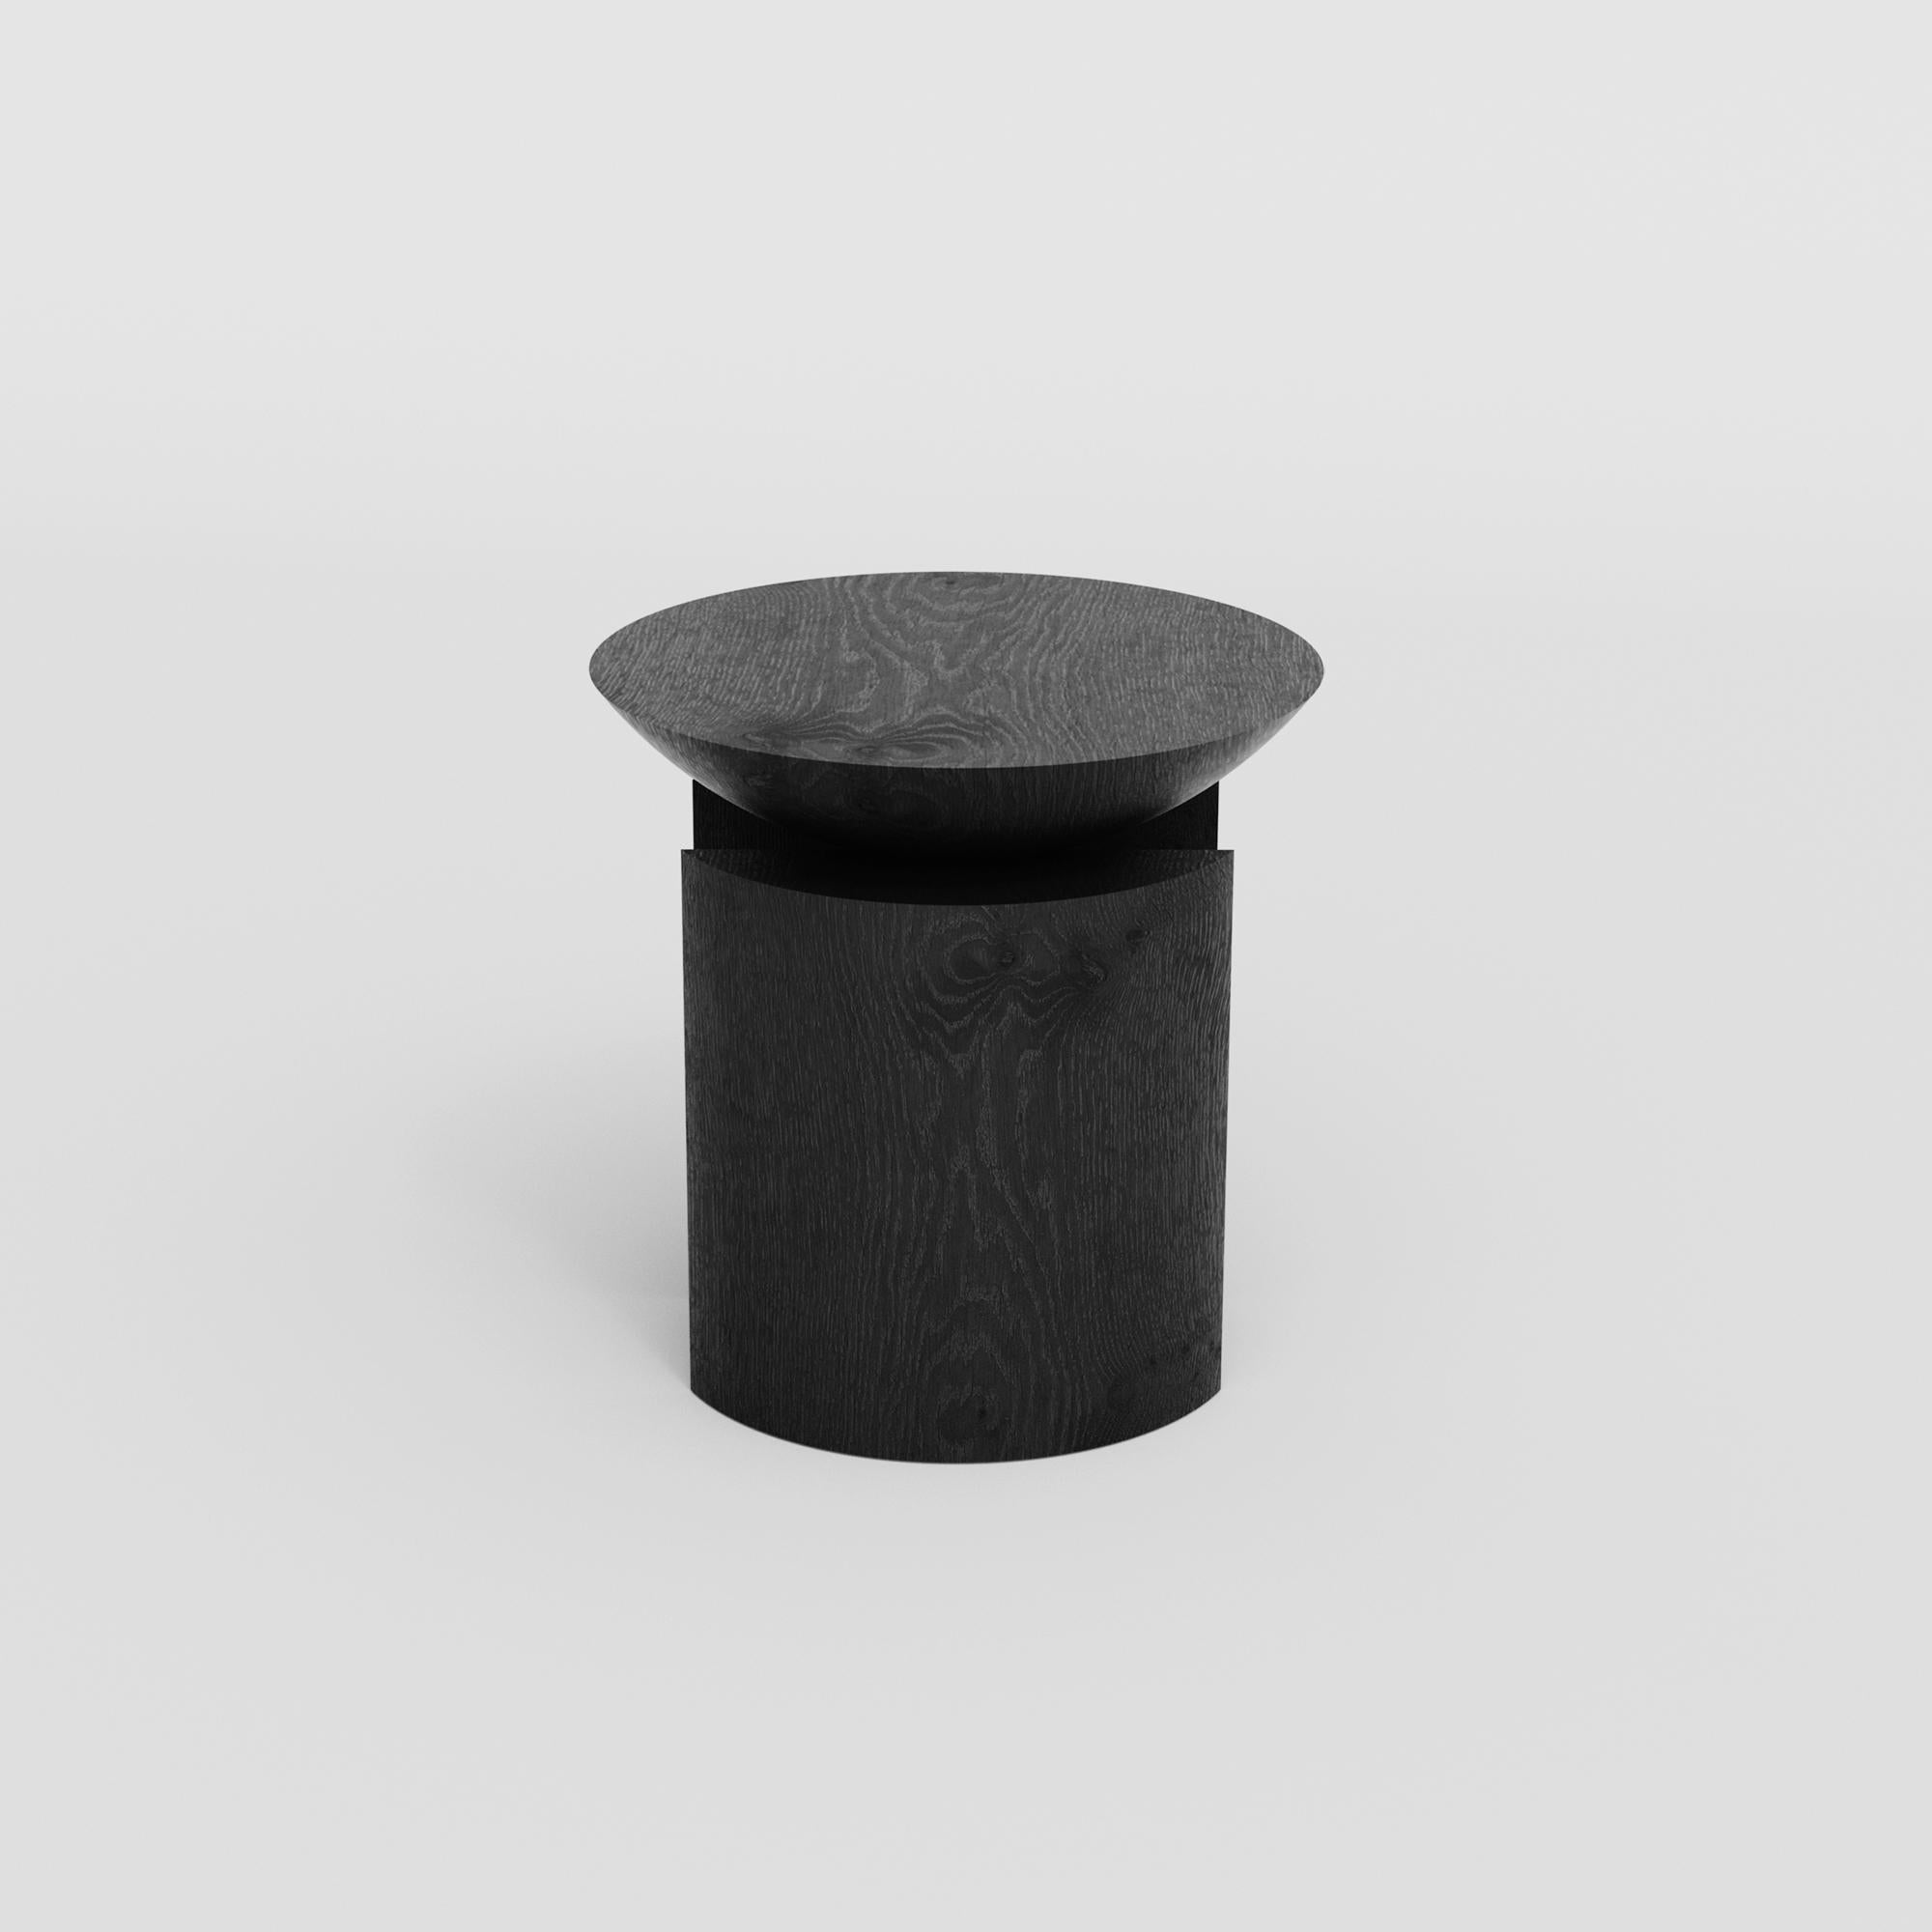 Minimalist Anca Sculptural Side Table or Stool in Tropical Hardwood by Pedro Paulo Venzon For Sale